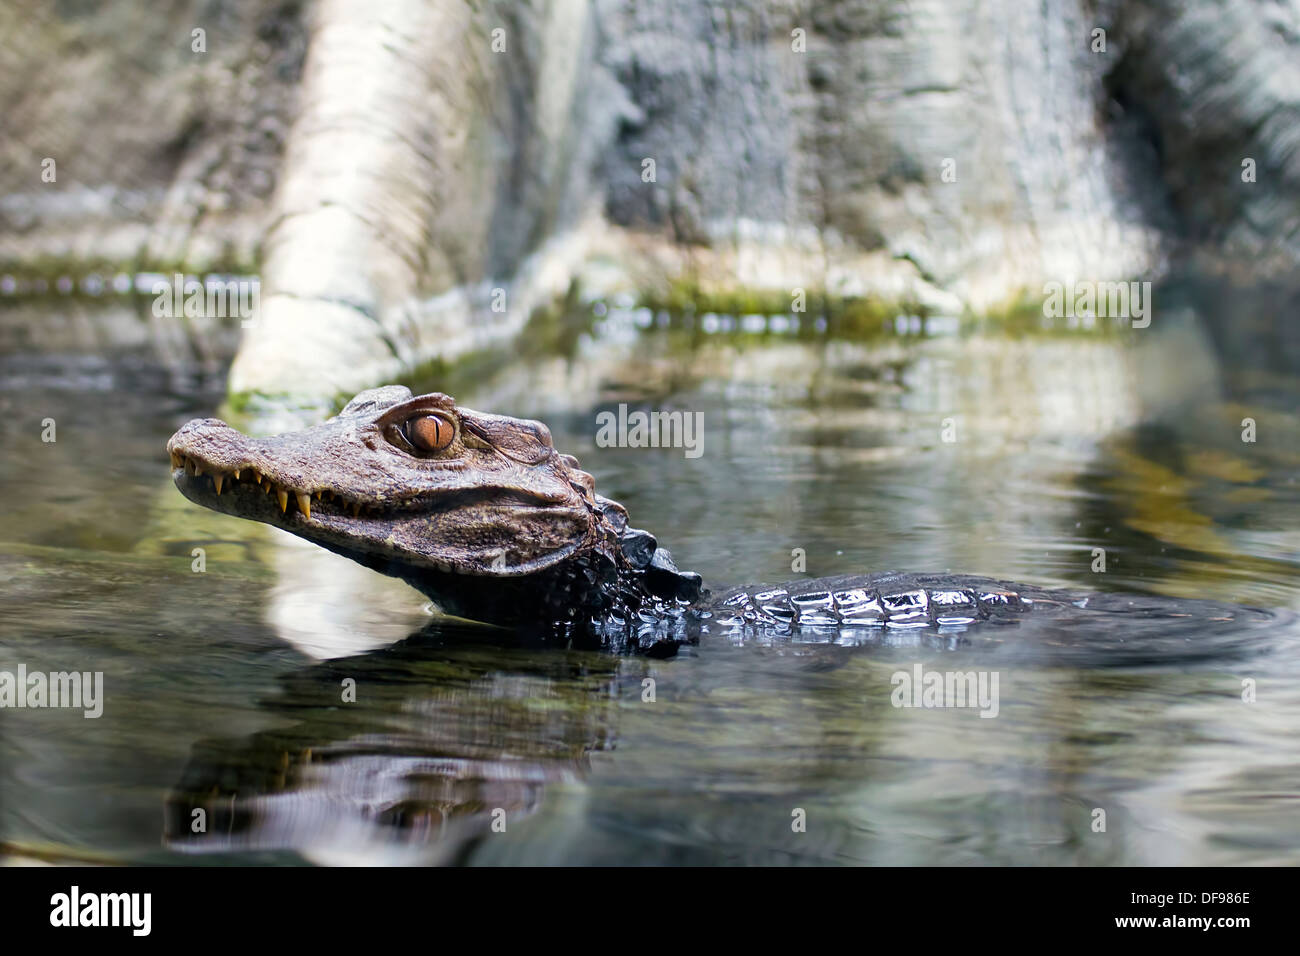 Alligator Young Swimming in Swampy Water Stock Photo